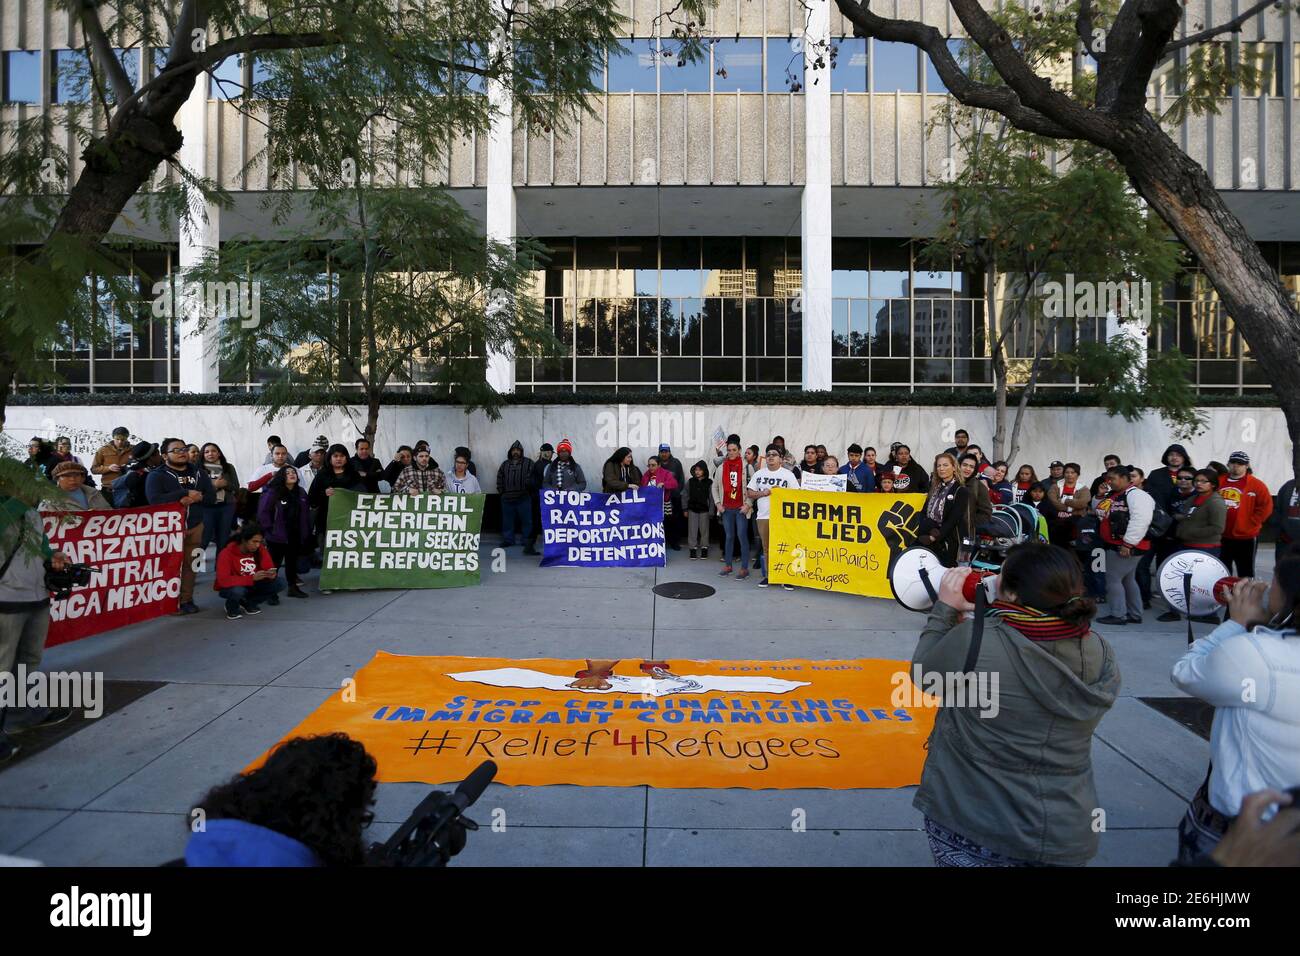 Activist gather outside a Federal Building while protesting against Immigration and Customs Enforcement (ICE) raids on Central American refugees in Los Angeles, California January 26, 2016.   REUTERS/Mario Anzuoni Stock Photo